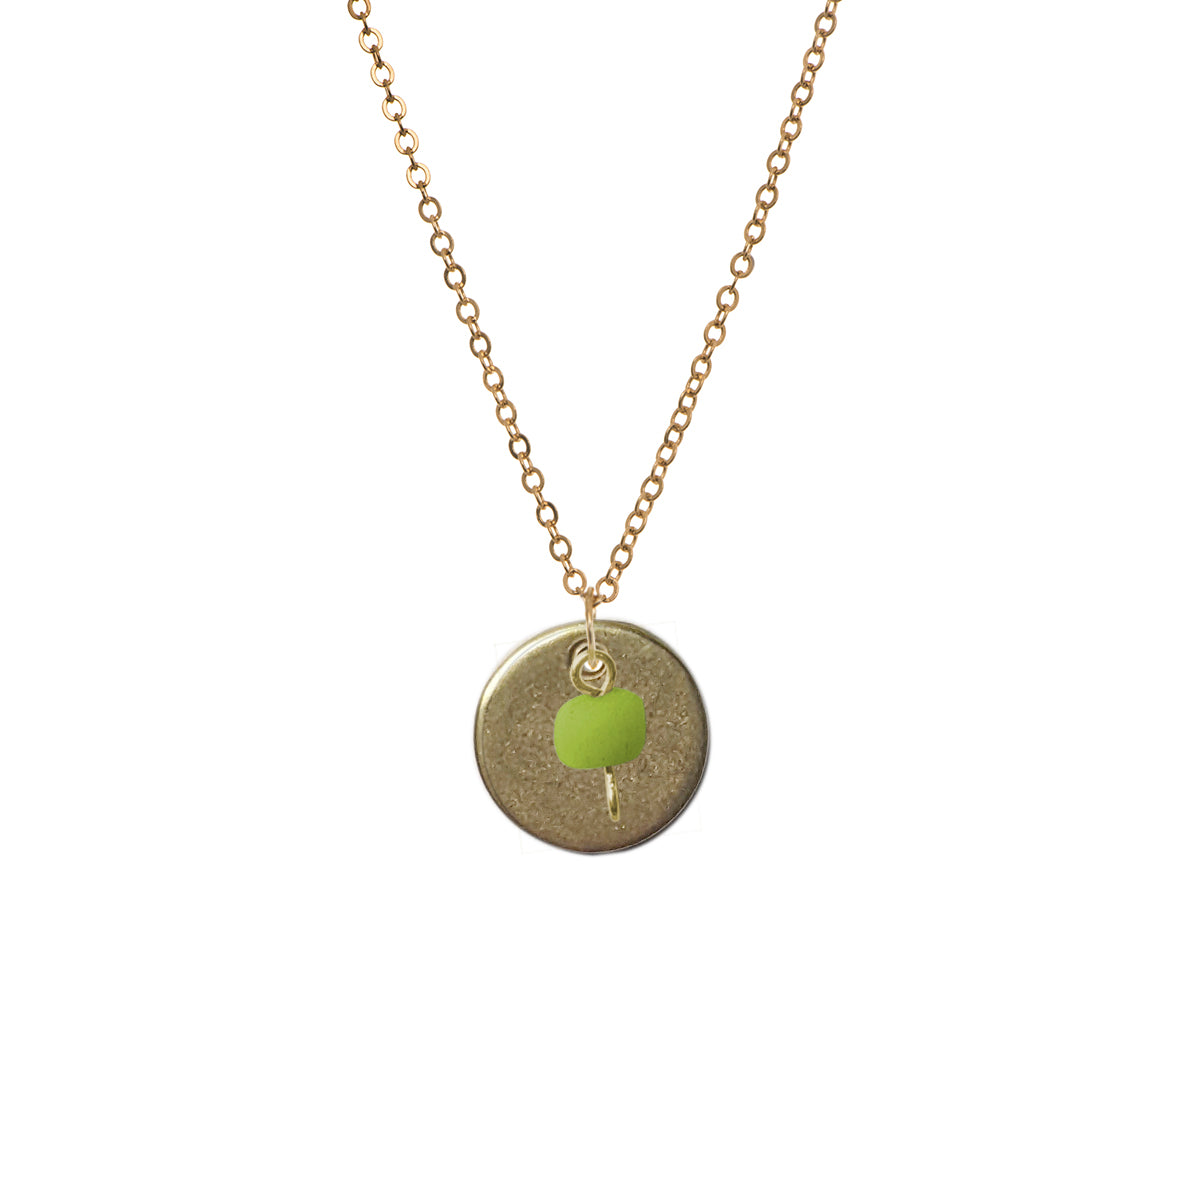 Garden Pendant Lime Green Necklace. Fair Trade in Indonesia for Just Trade.